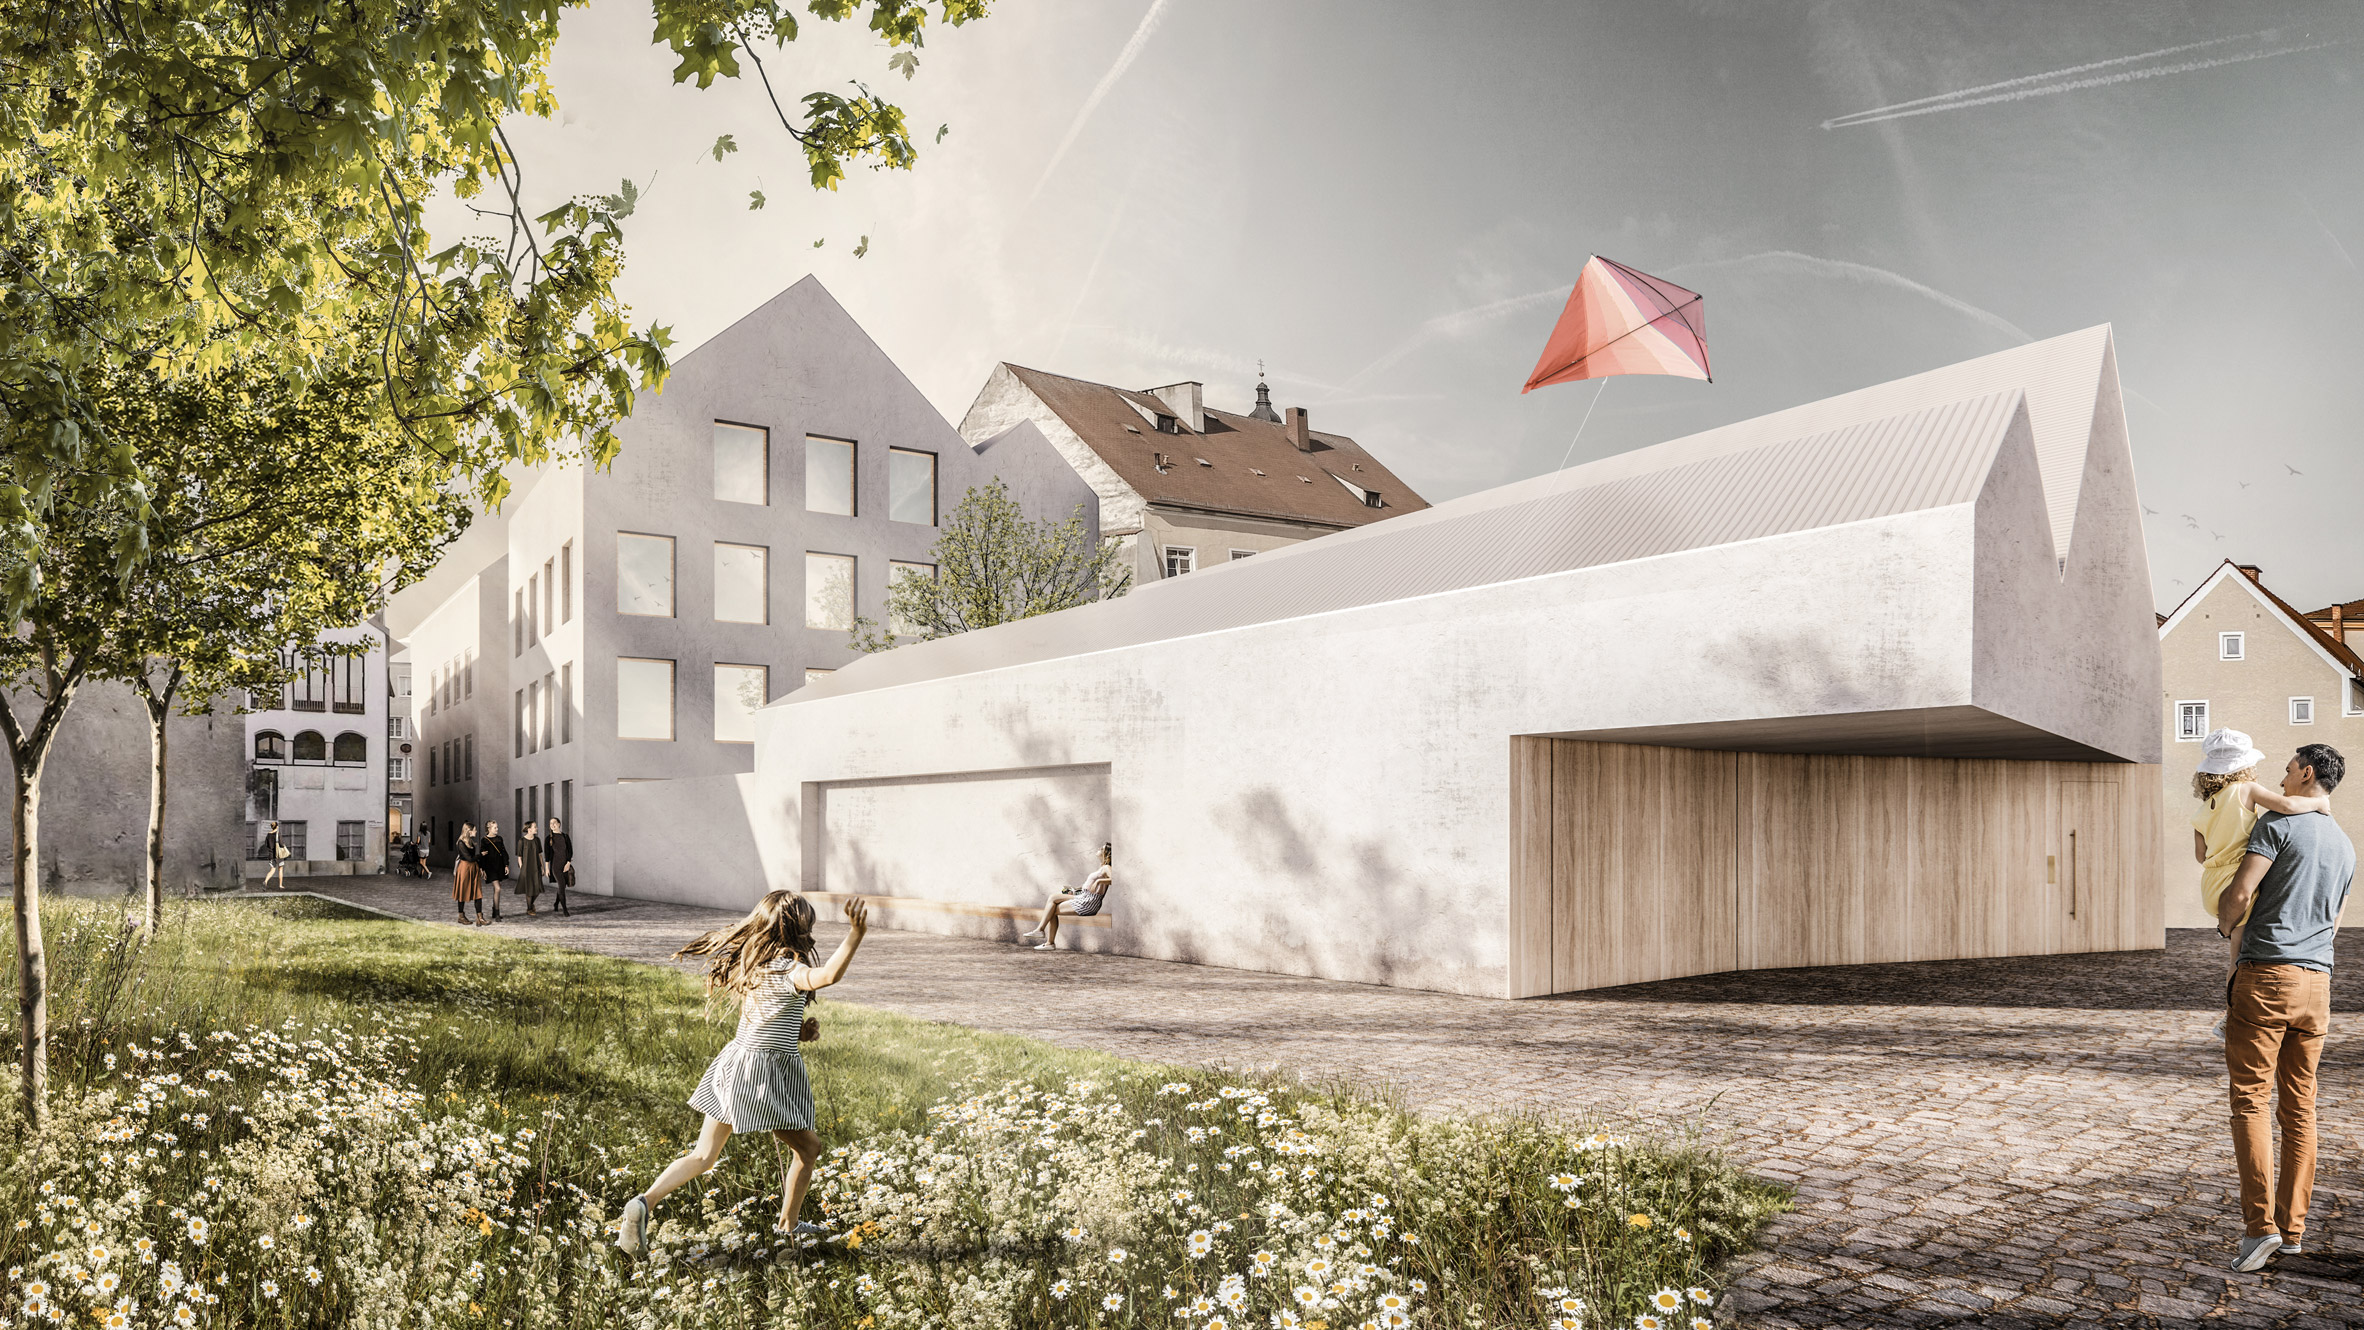 Marte.Marte Architects unveils plans to convert Hitler's house into police station